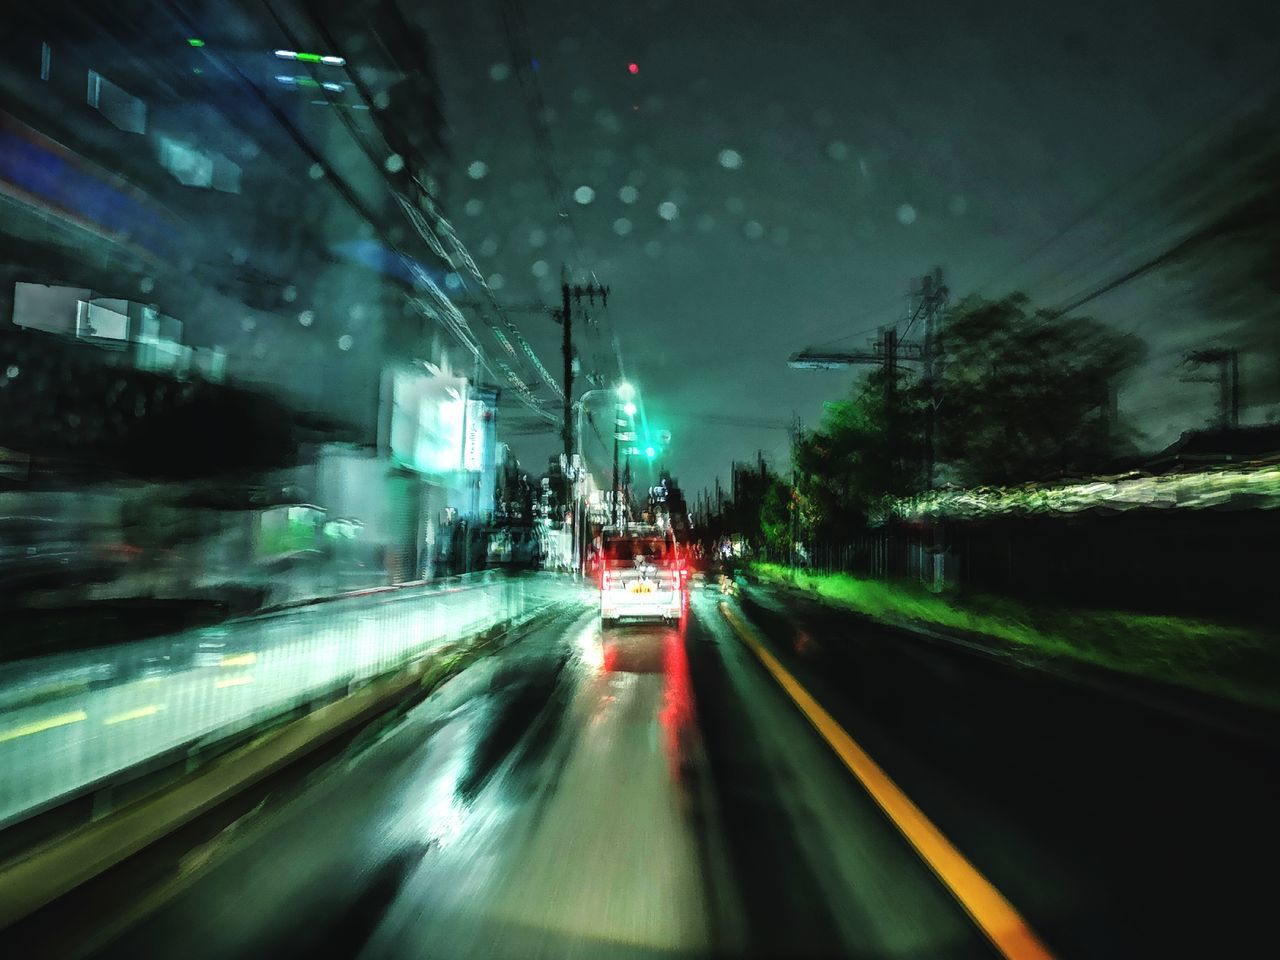 BLURRED MOTION OF VEHICLES ON ROAD IN CITY